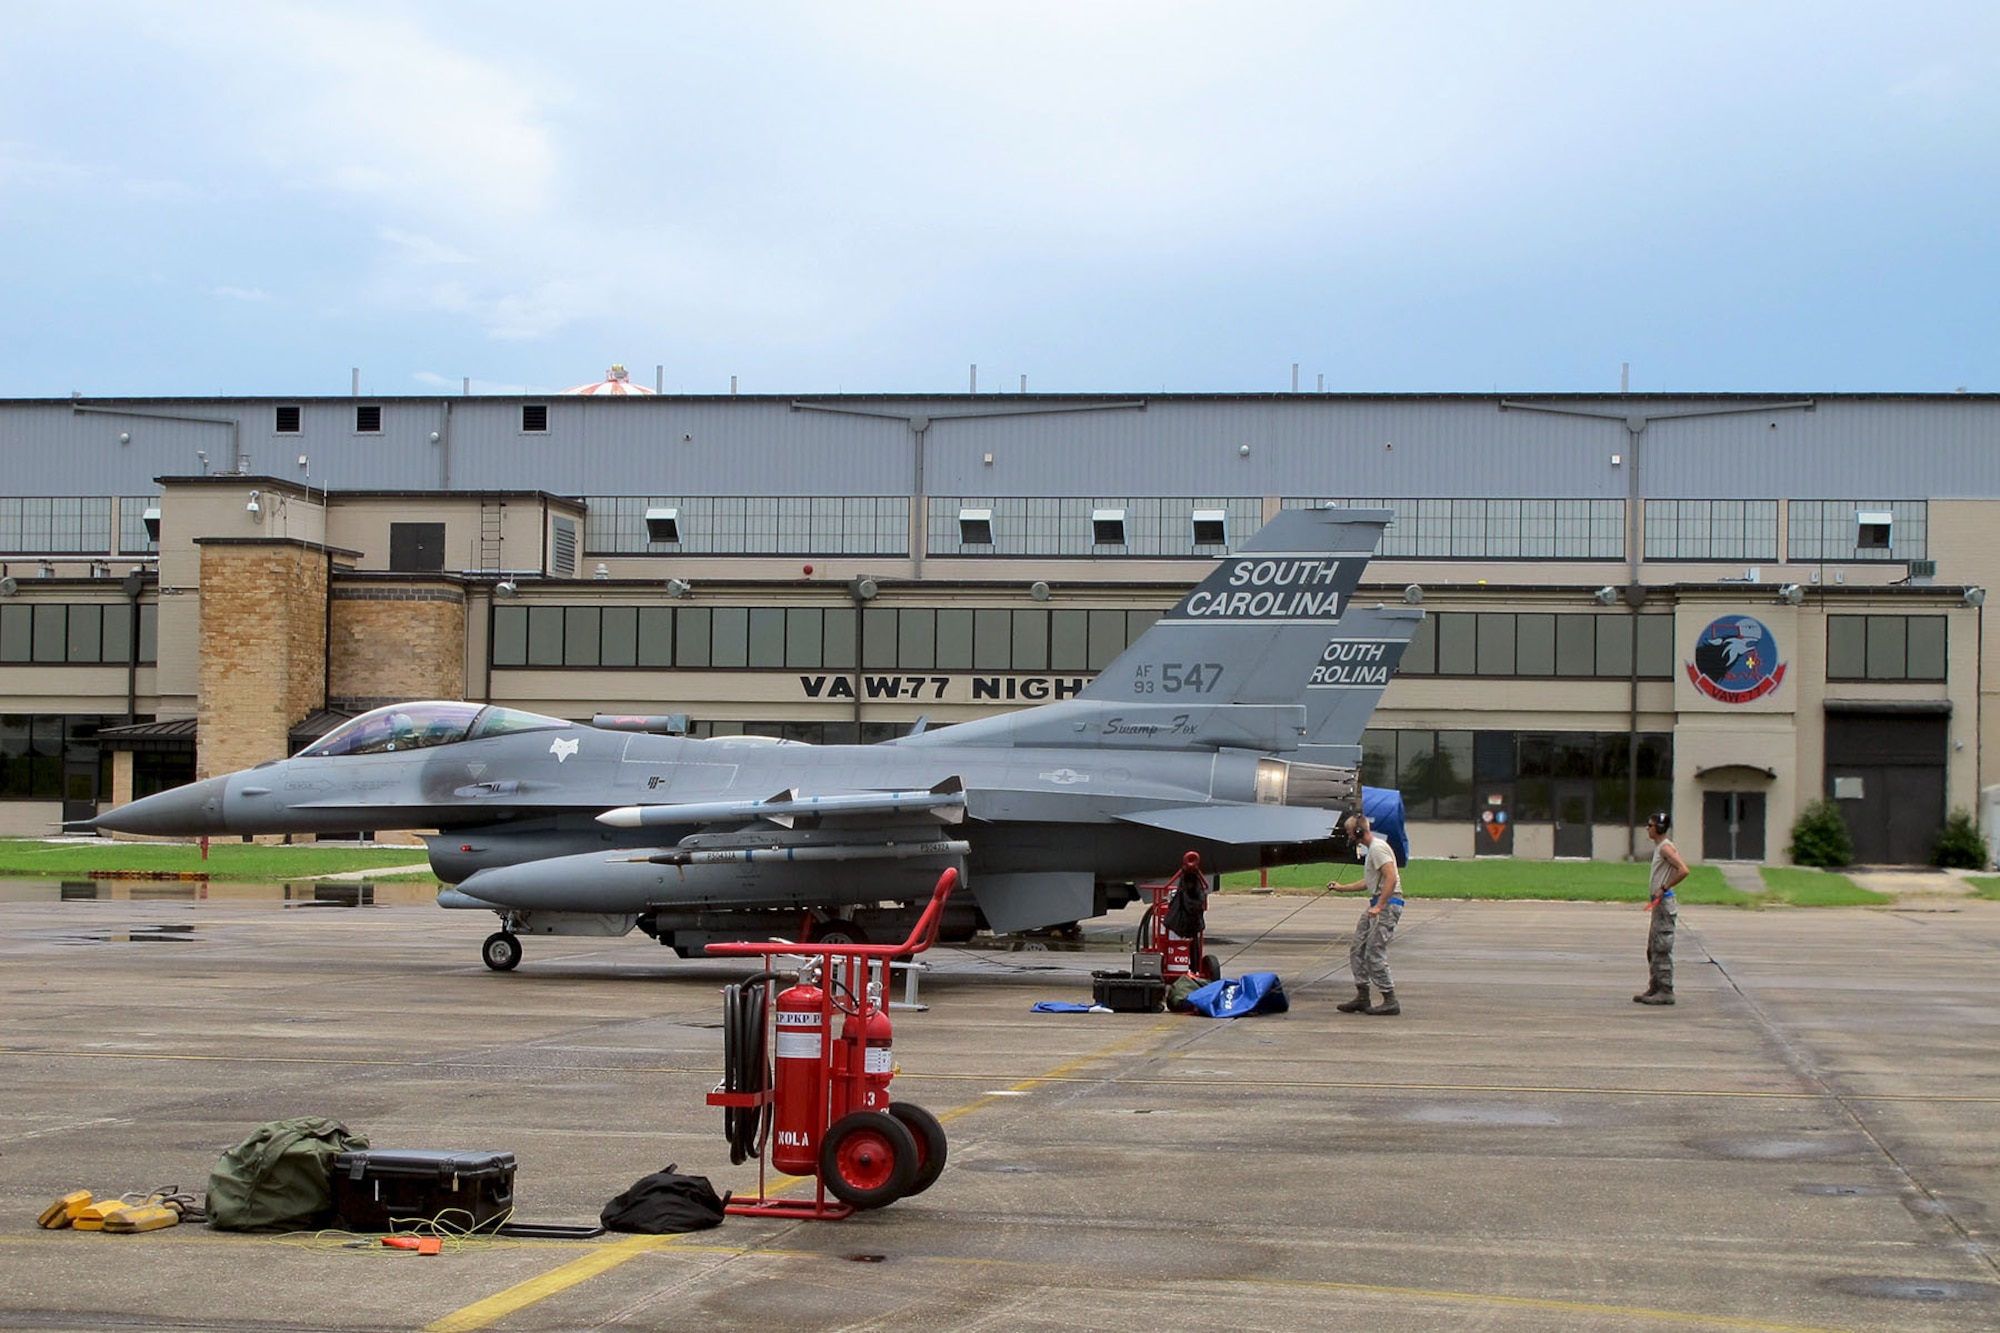 U.S. Air Force Airmen with the South Carolina Air National Guard from McEntire Joint National Guard Base, S.C., conduct flight line activities during an F-16 Fighting Falcon training mission at the Naval Air Station Joint Reserve Base New Orleans, La., June 20, 2013.   (U.S. Air National Guard photo by 157th Fighter Squadron Unit Public Affairs Representative/Released)